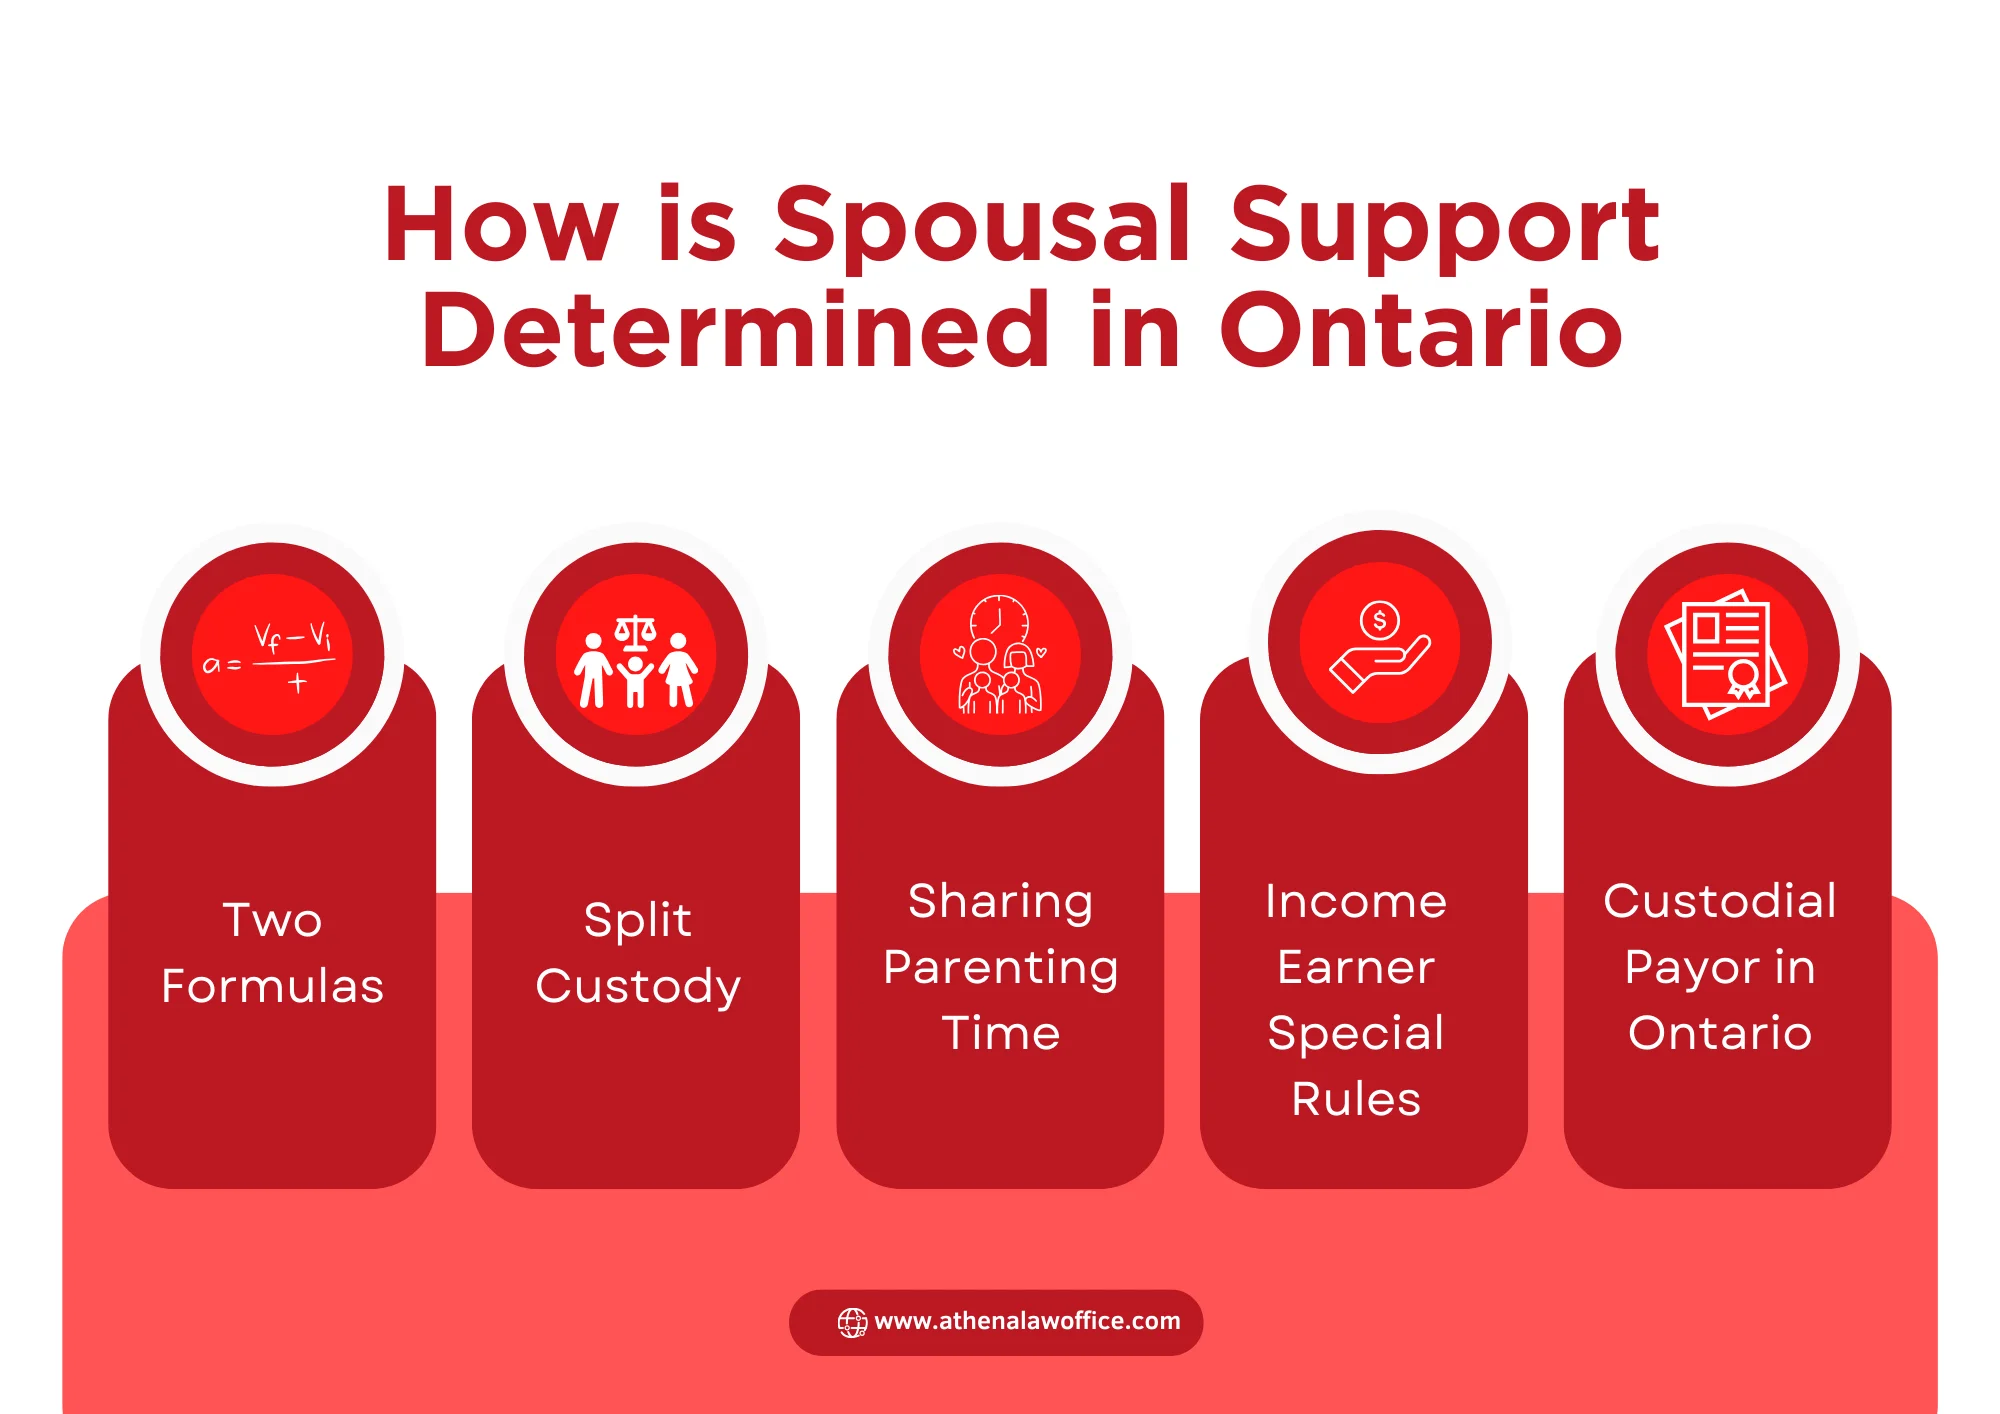 An infographic on how spousal support is determined in Ontario